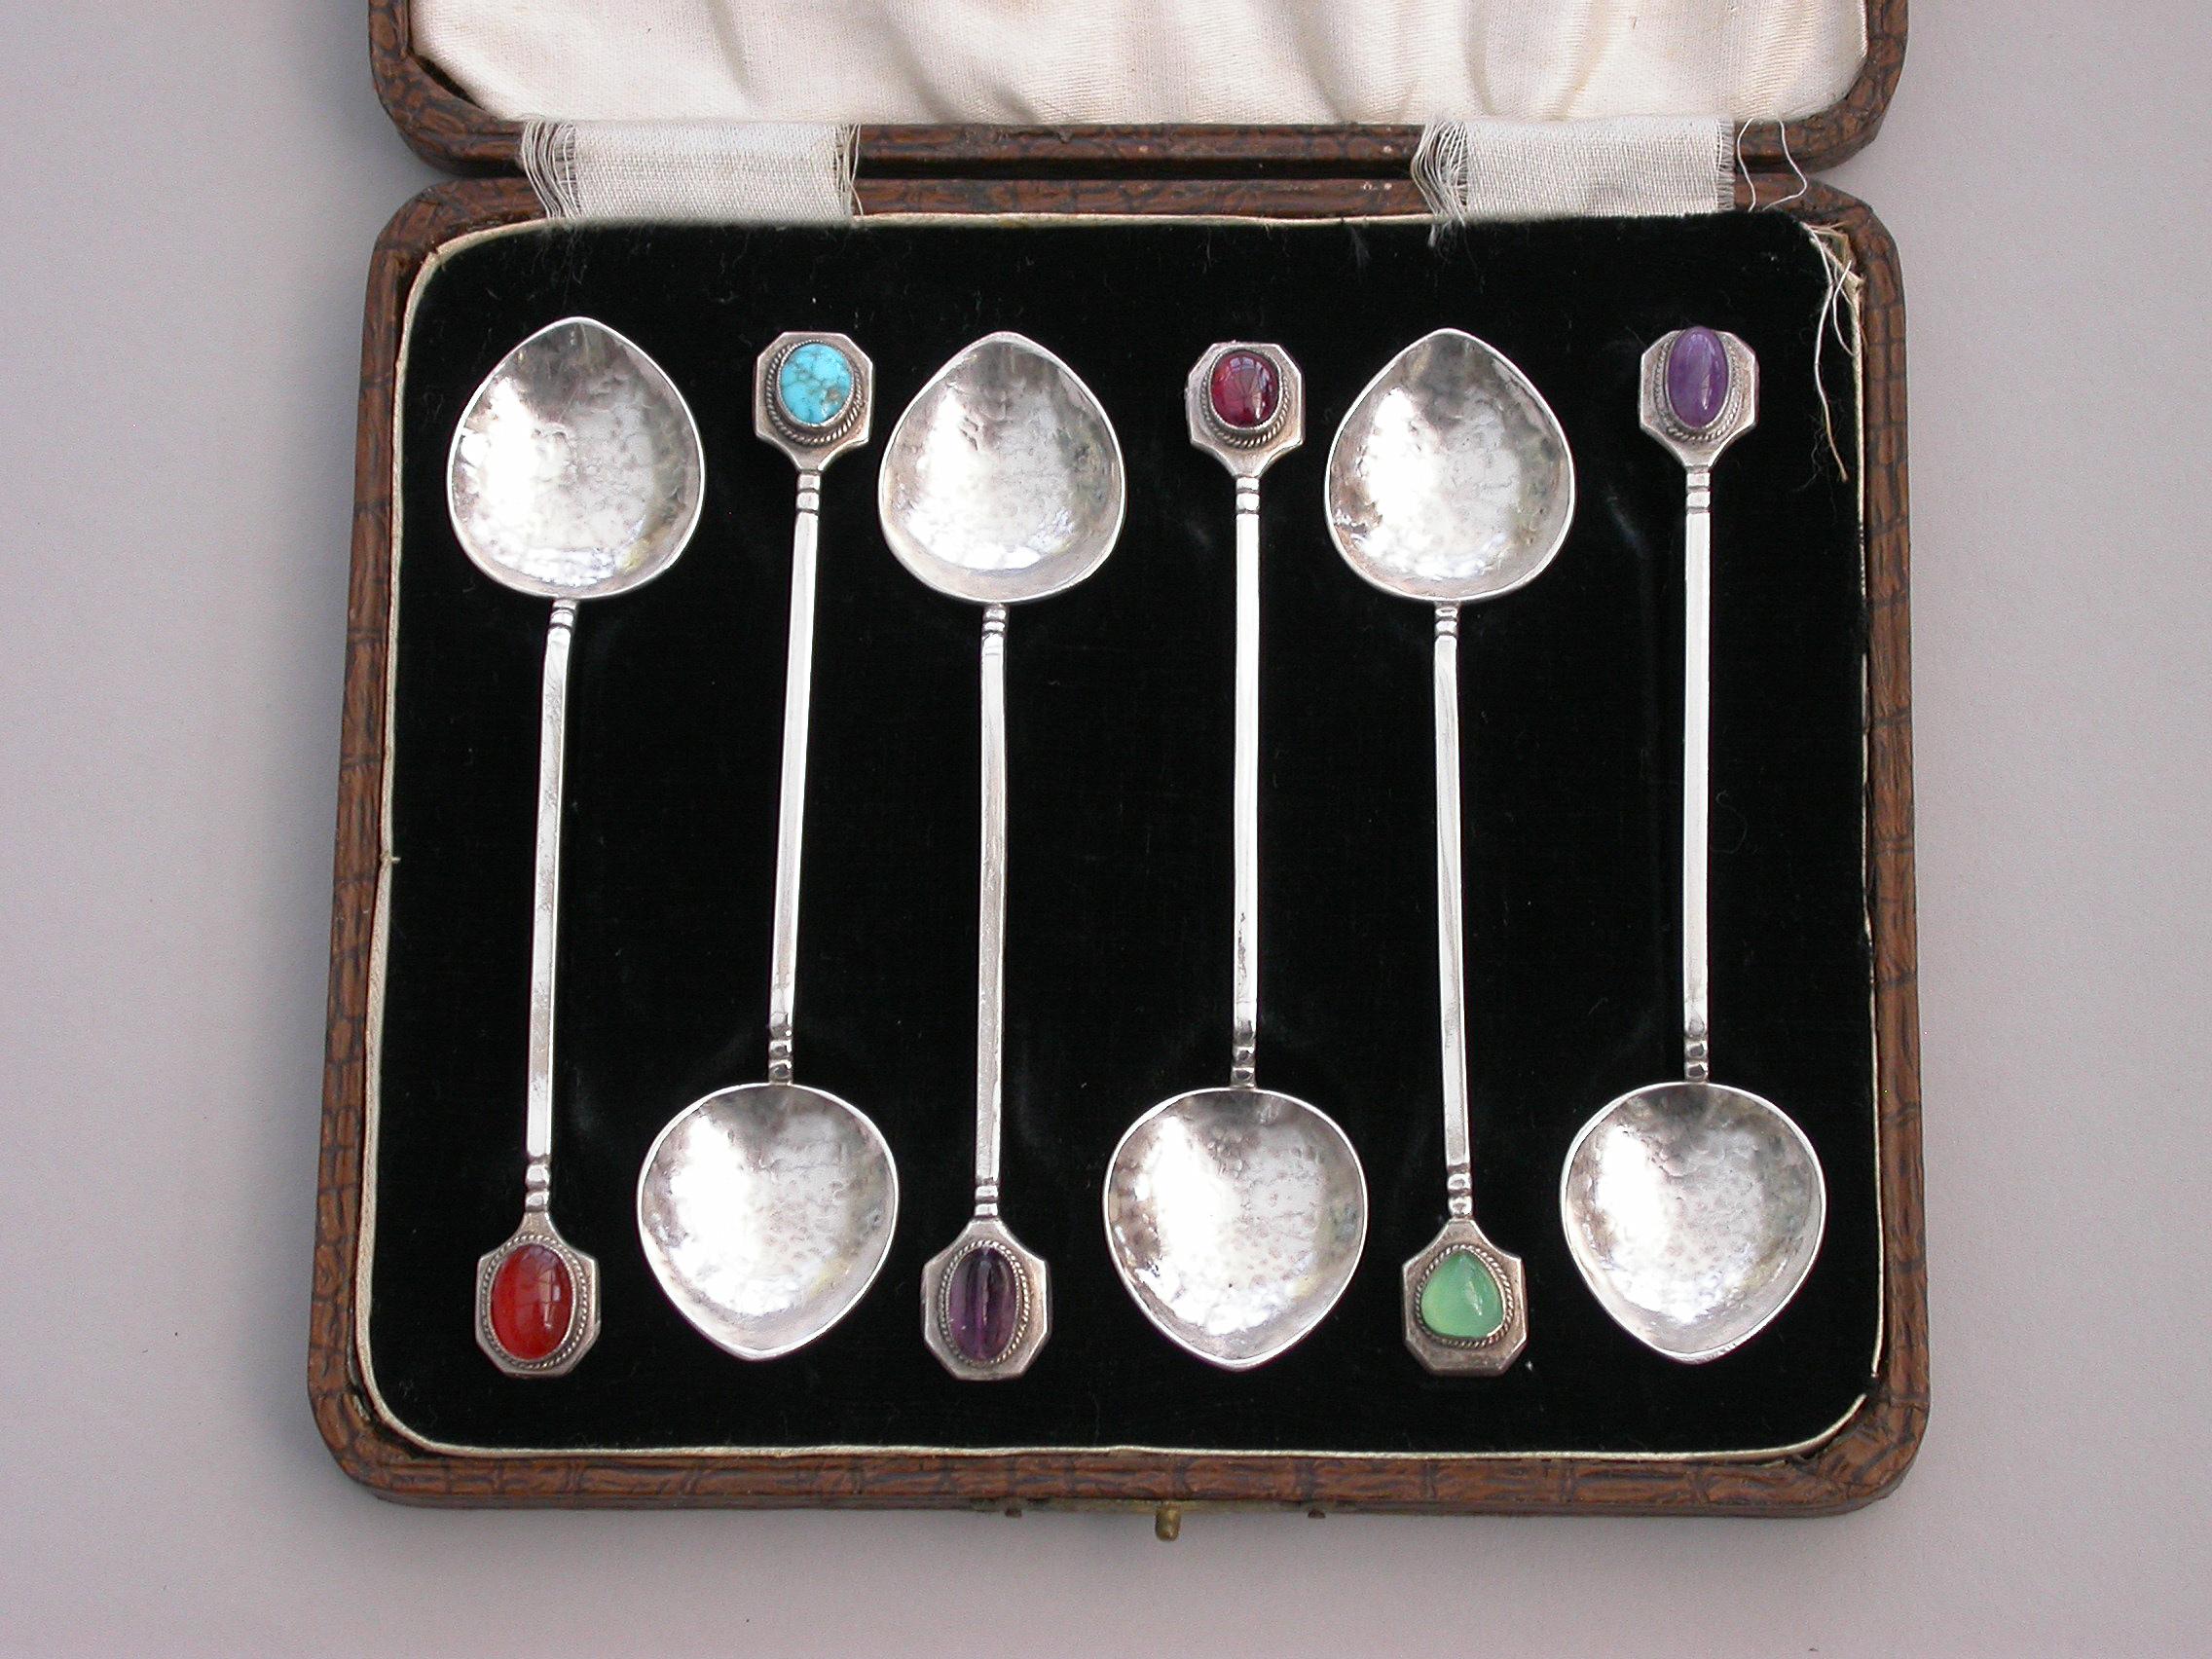 A cased set of six early 20th century Australian Arts & Crafts silver teaspoons with hammered bowls and various different colored hardstone cabochon finials.

Marked :- 'Sterling Silver', probably Australian c1910

60 grams total weight of the